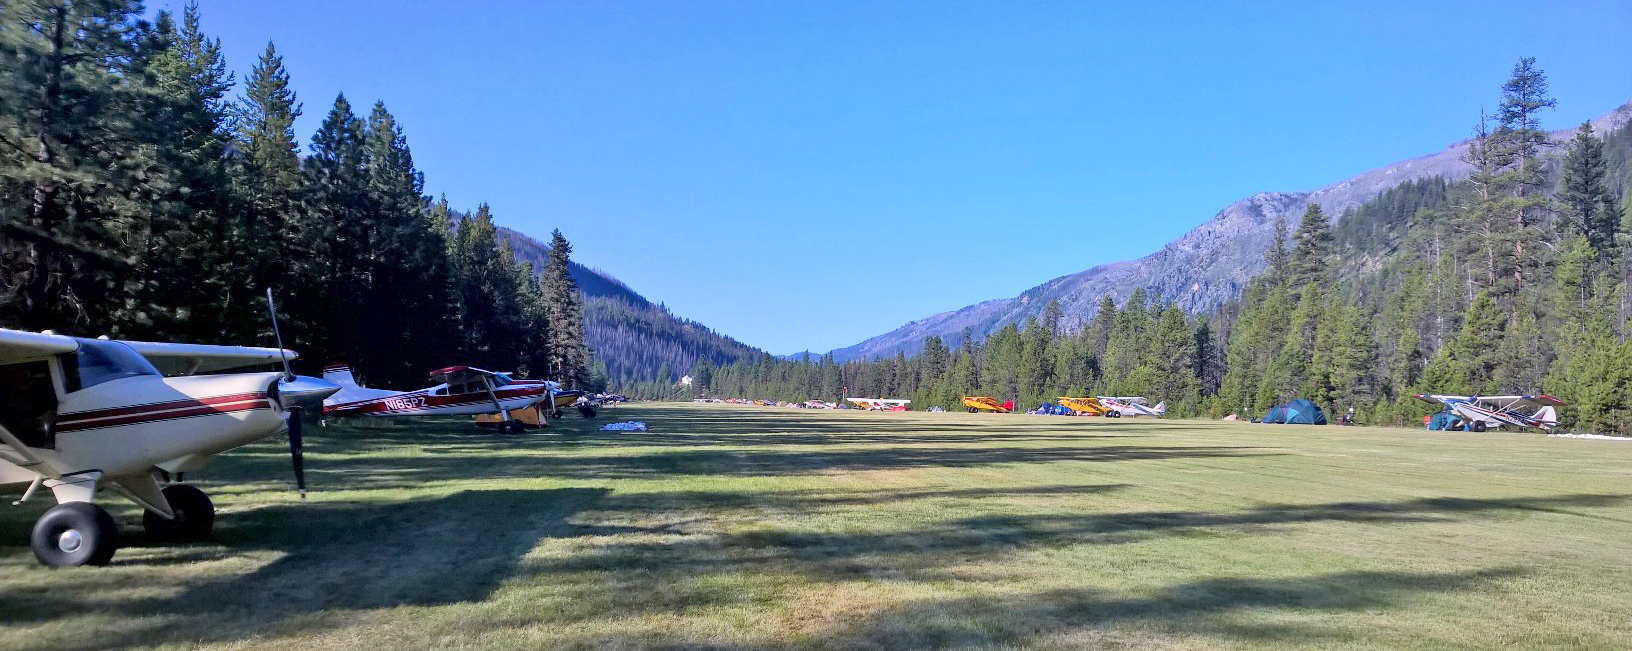 Be aware that on several weekends per year, Johnson Creek plays host to fly-ins that can attract over 100 aircraft. Unless you are participating in those fly-ins, you should avoid those weekends. Check the Idaho Division of Aeronautics’ Calendar. Photo by Jeanine Grant, shot during the SuperCub.org fly-in.